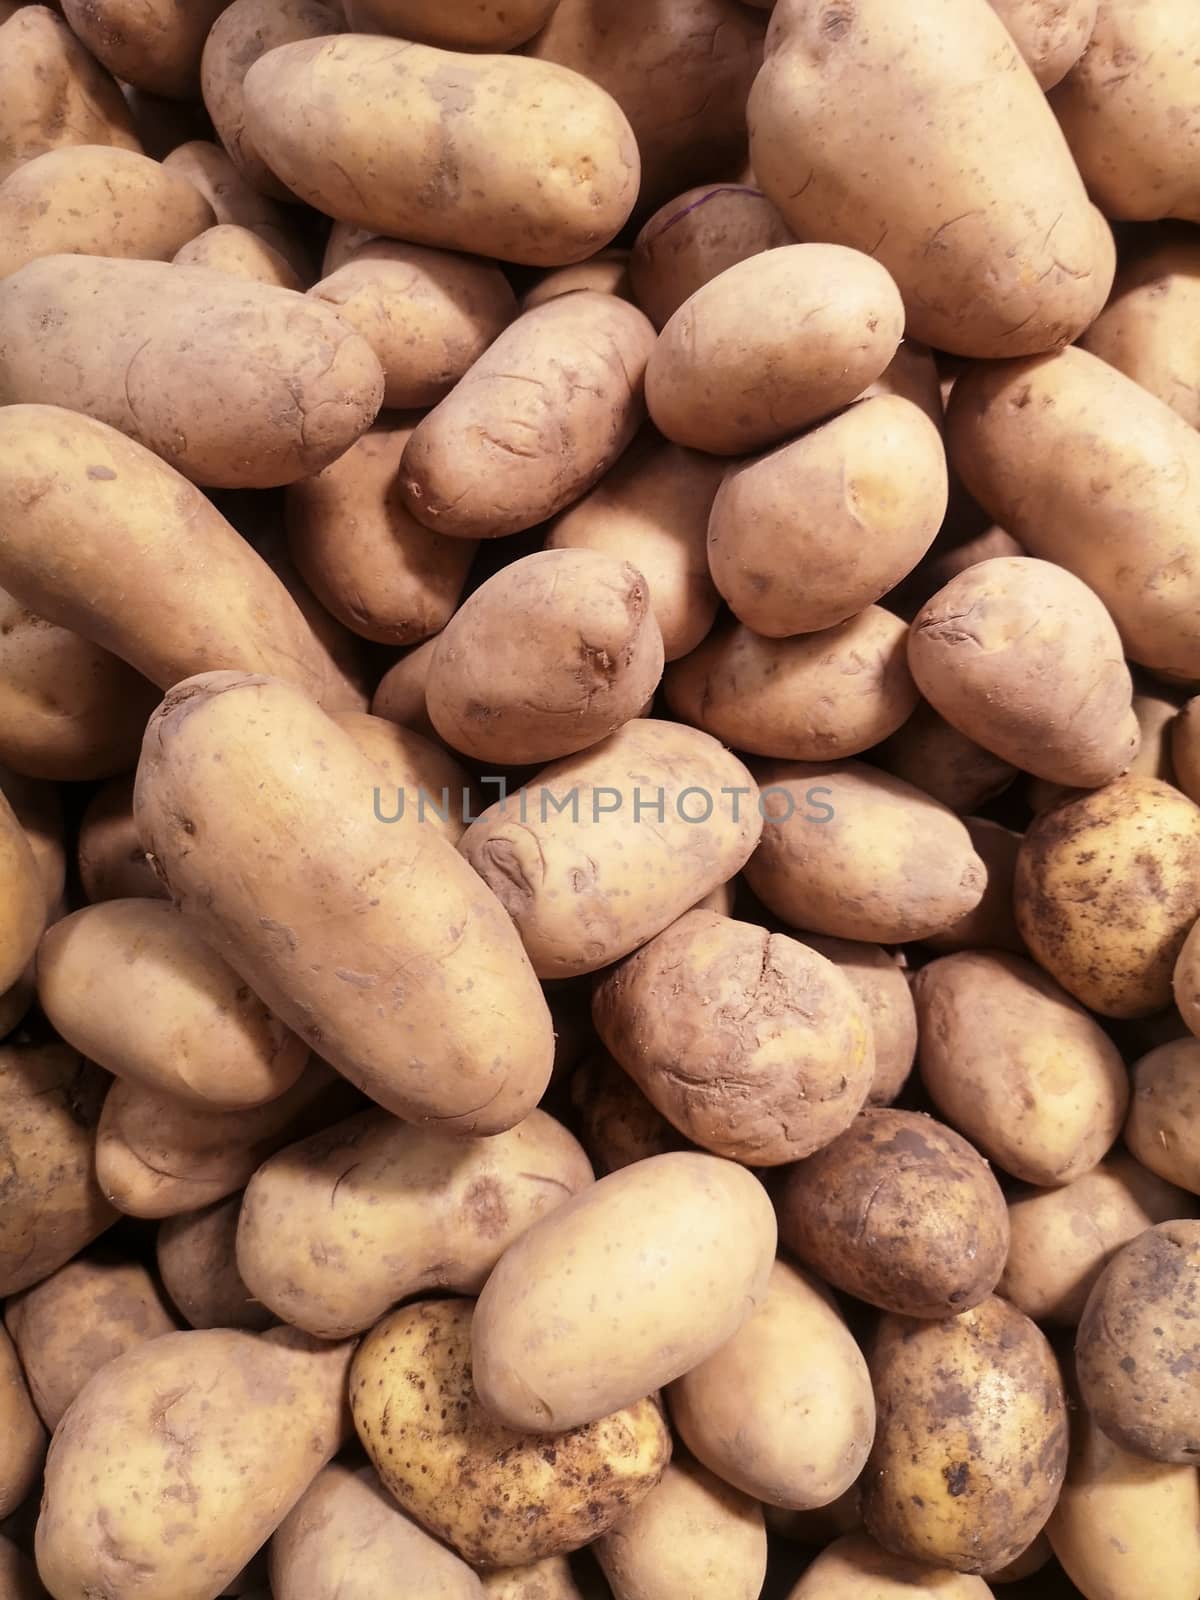 Unwashed potatoes in a supermarket on a store counter for sale by galinasharapova